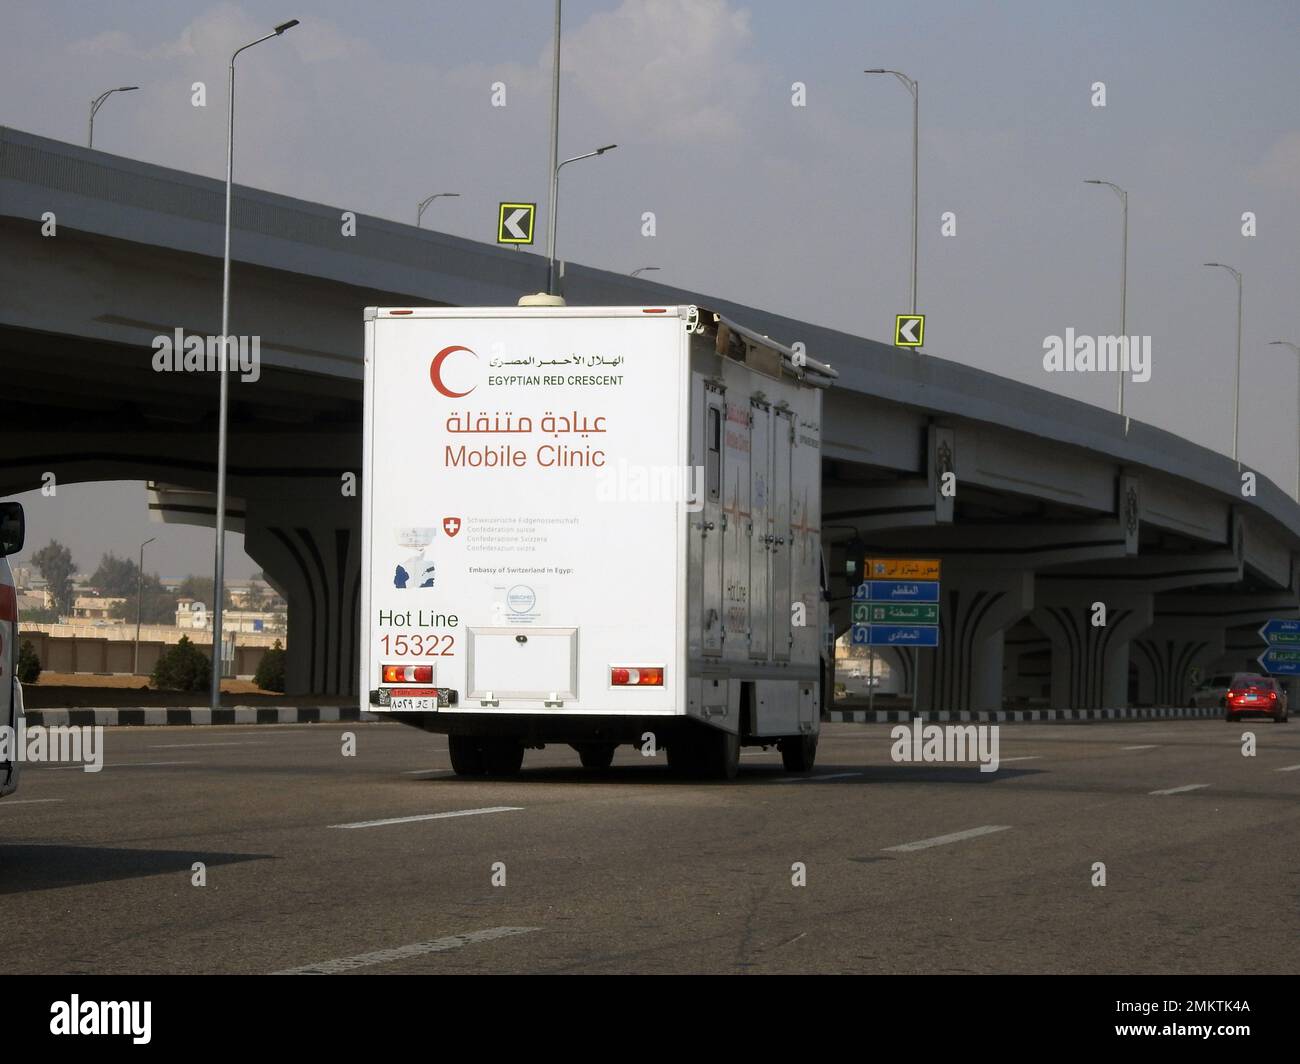 Cairo, Egypt, January 8 2023: A mobile medical clinic vehicle of the Egyptian red crescent that gives medical services in Cairo, patient examination a Stock Photo